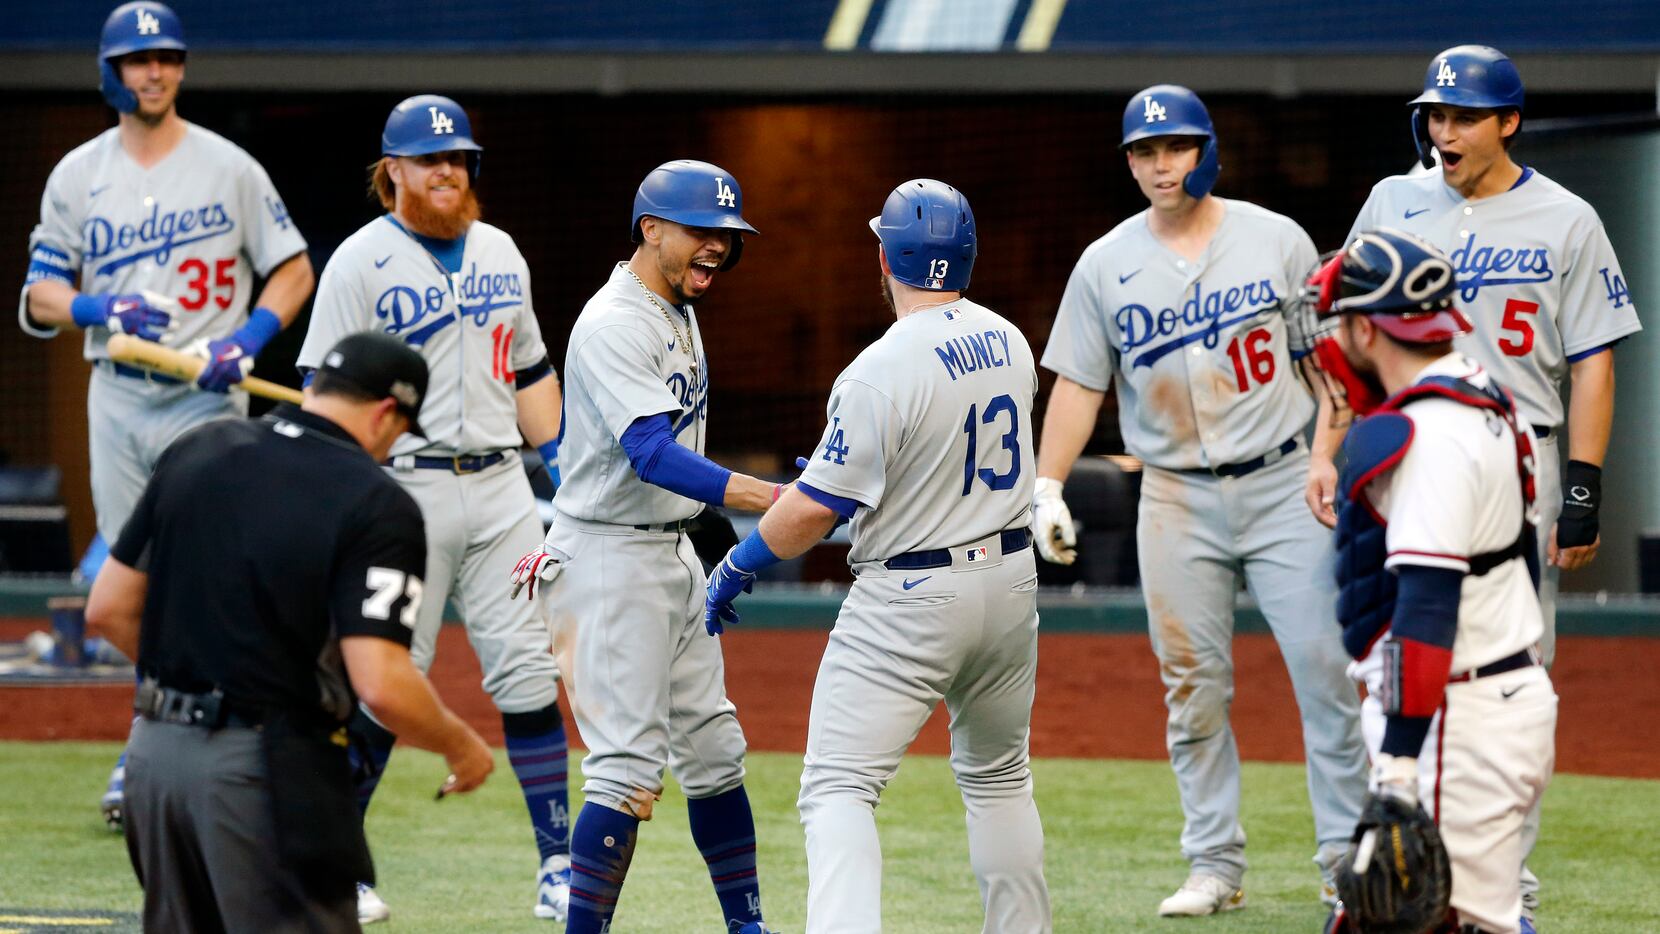 Historic Mexican Heritage Day Dodger Victory In Game1 - East